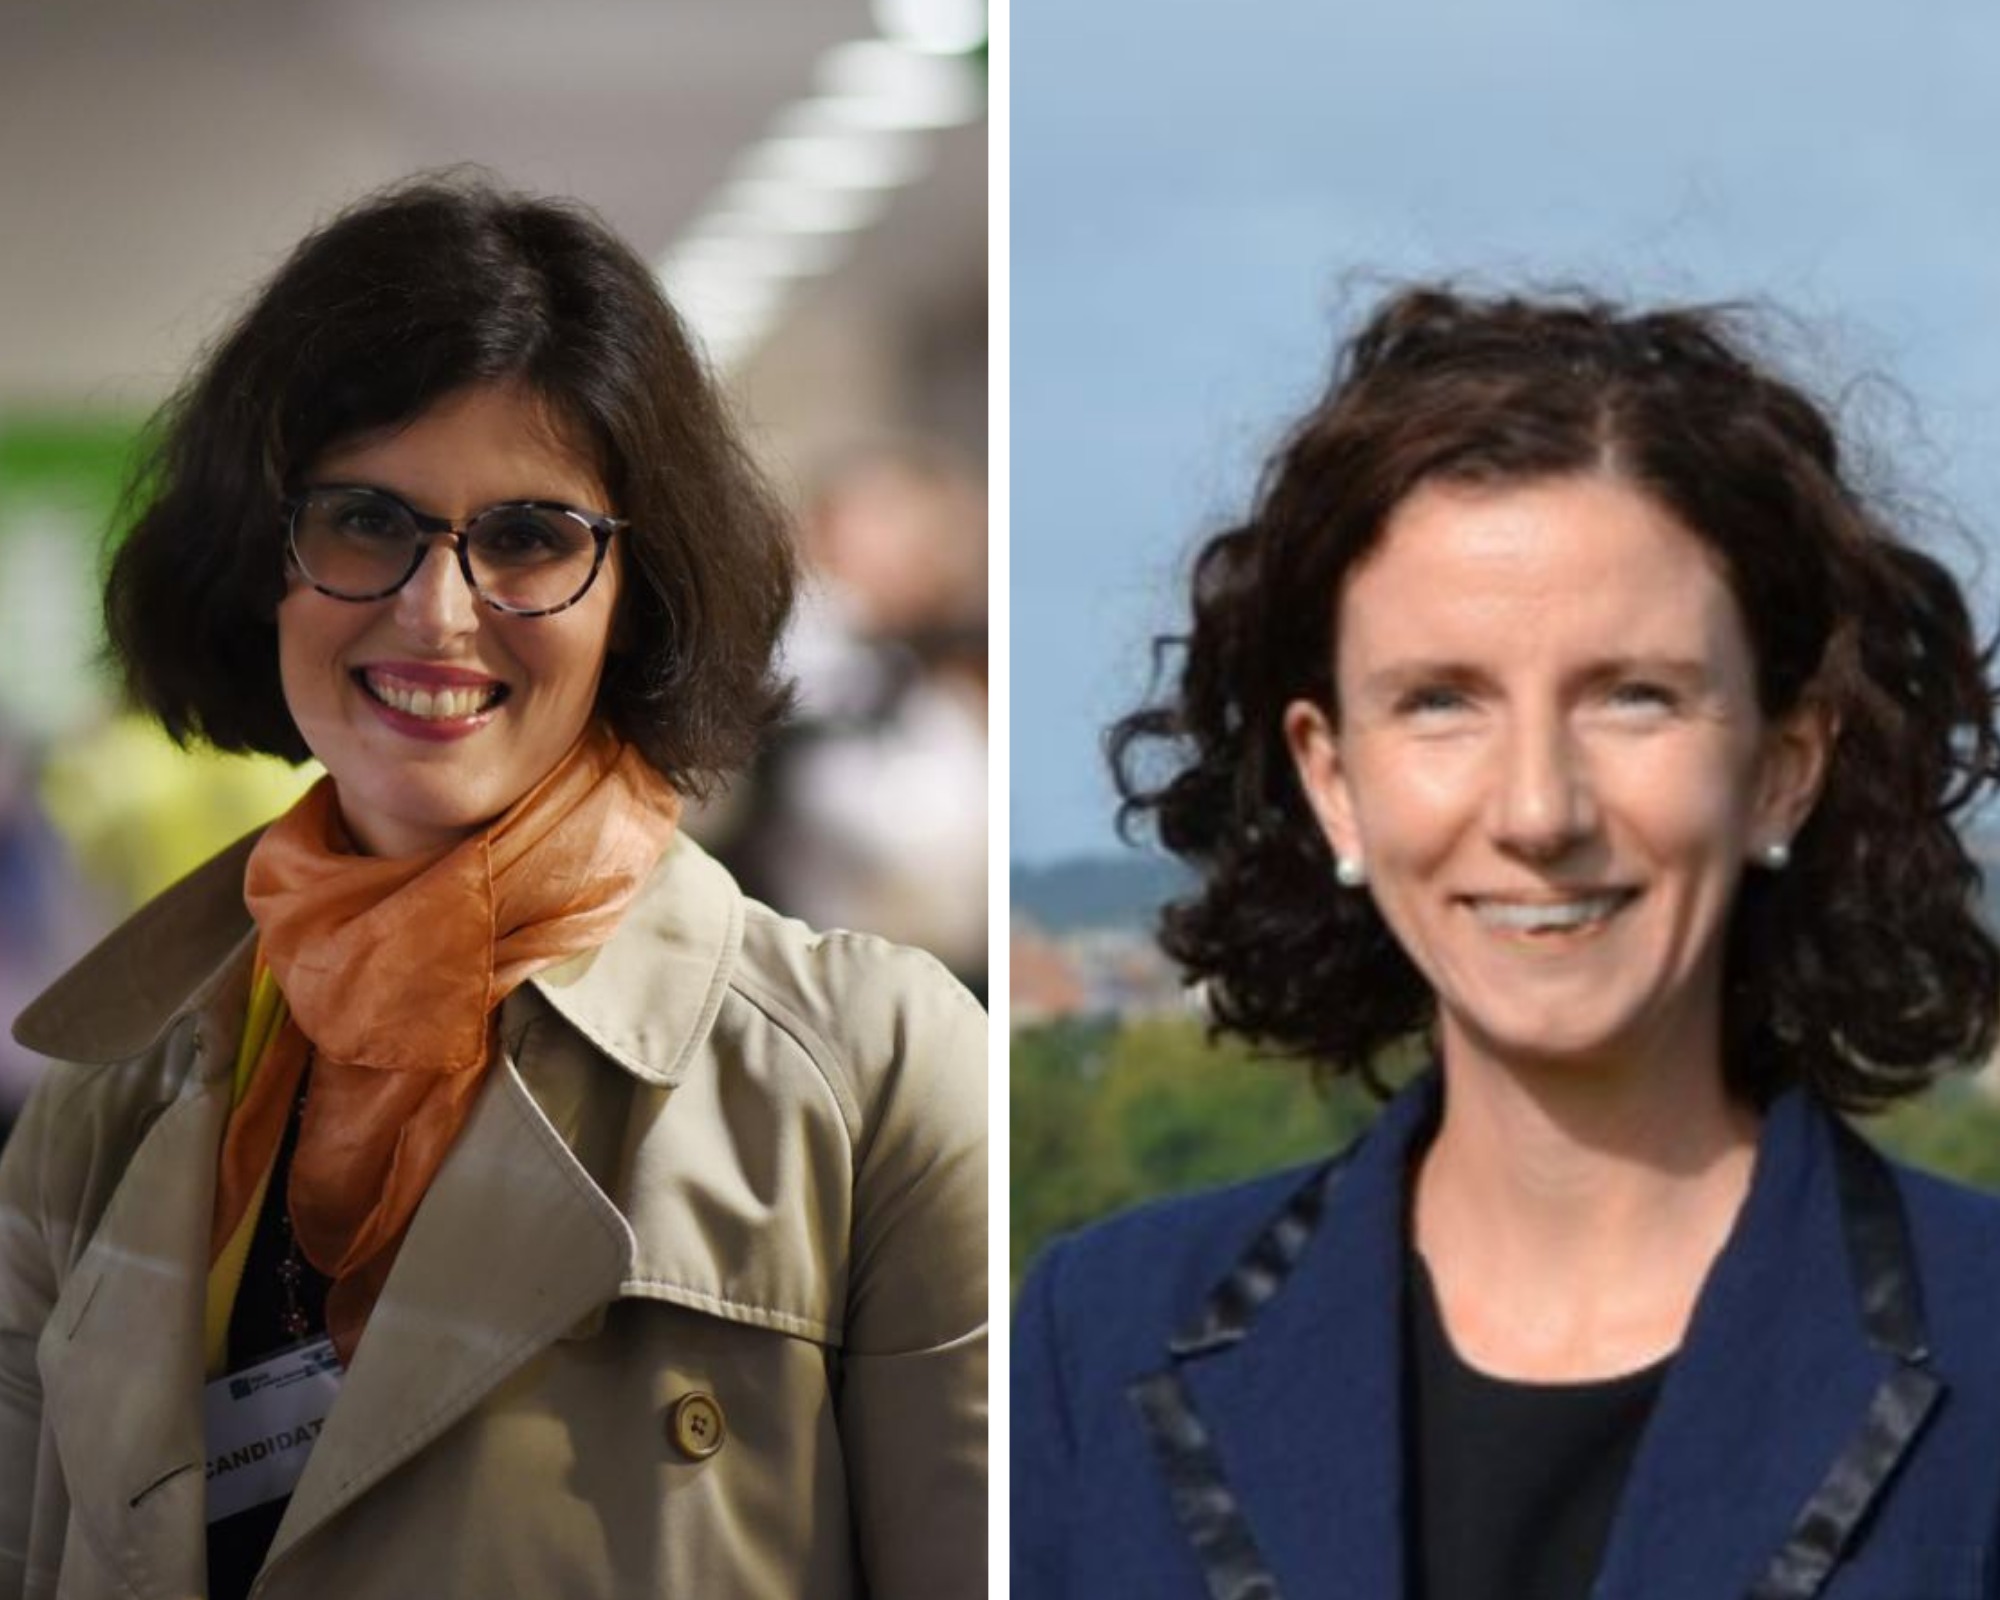 Oxfords two MPs Layla Moran and Anneliese Dodds both think East-West Rail should run electric trains, not diesel